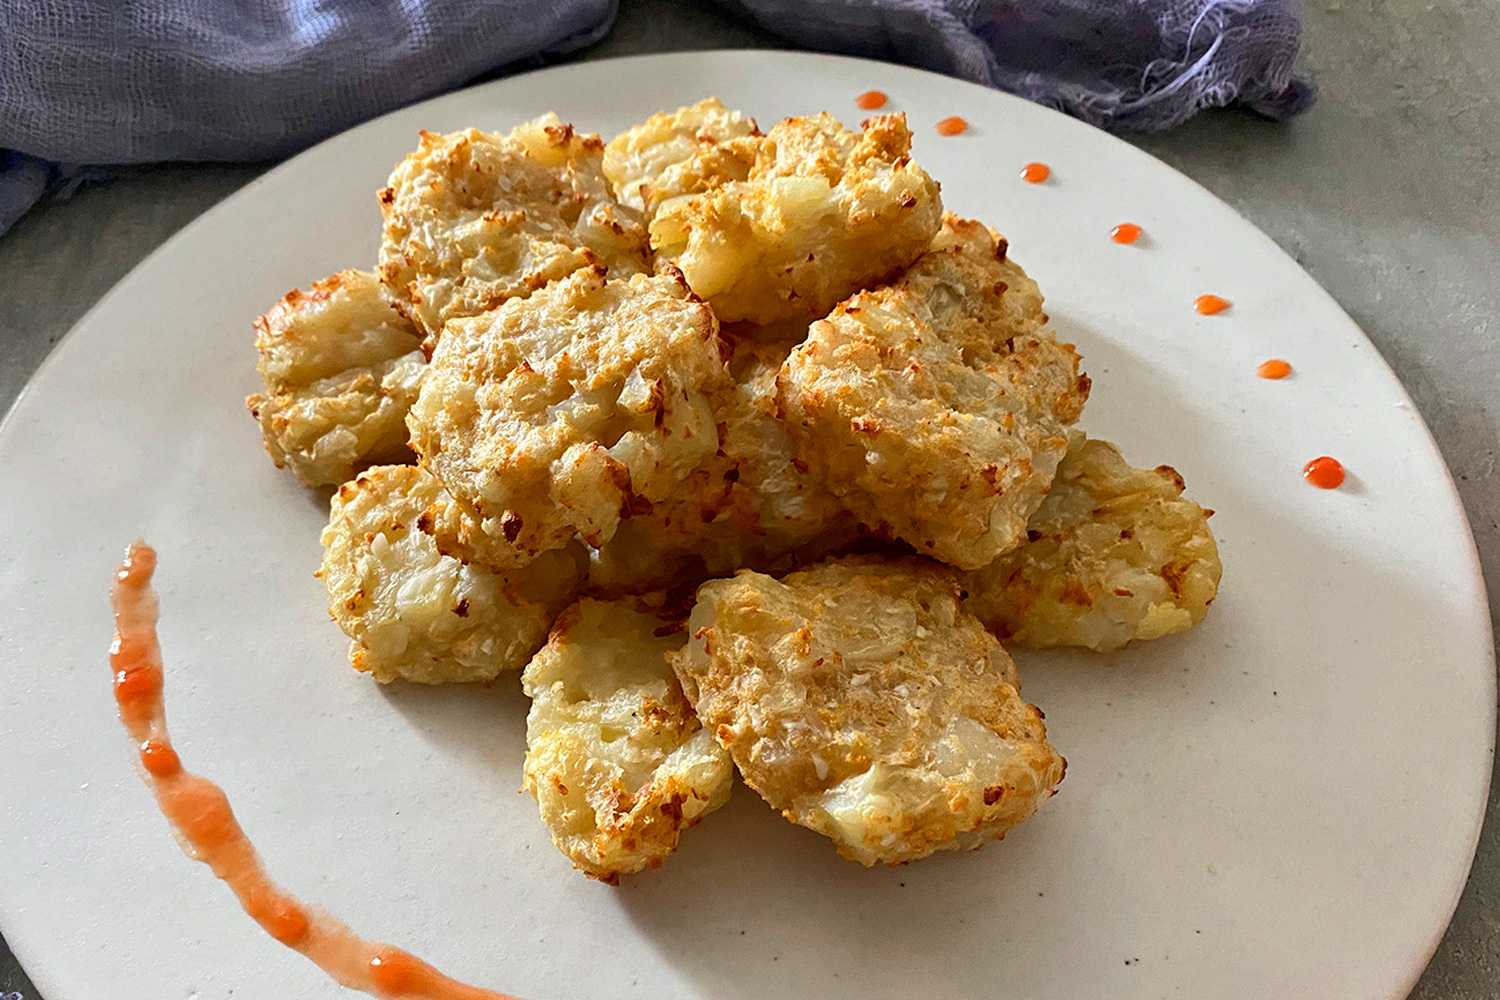 Homemade cauliflower tots on a white plate decorated with orange sauce